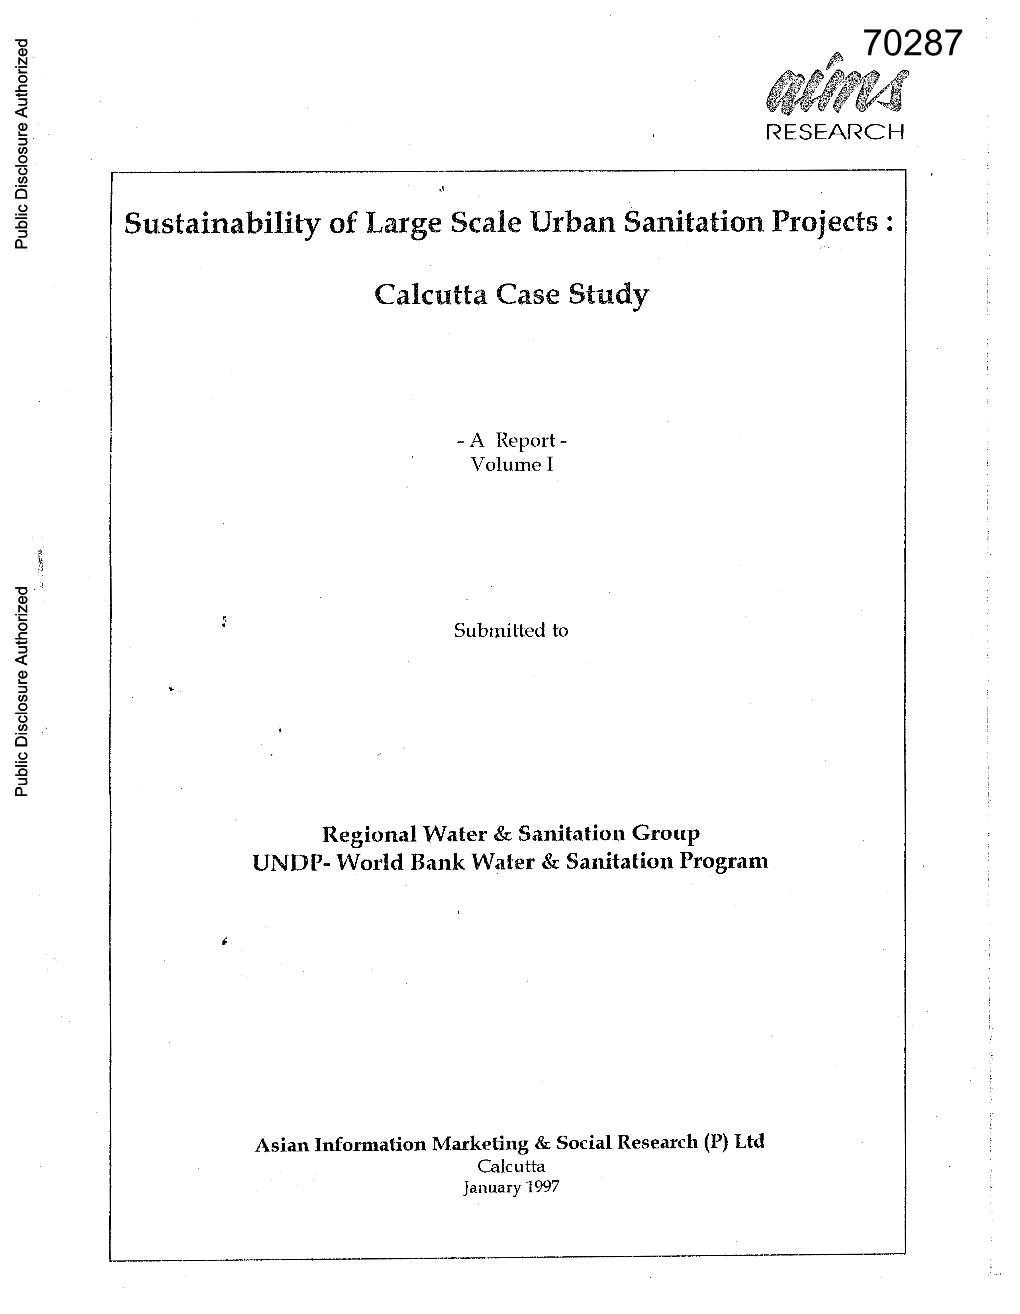 Sustainability of Large Scale Urban Sanitation Projects : Calcutta Case